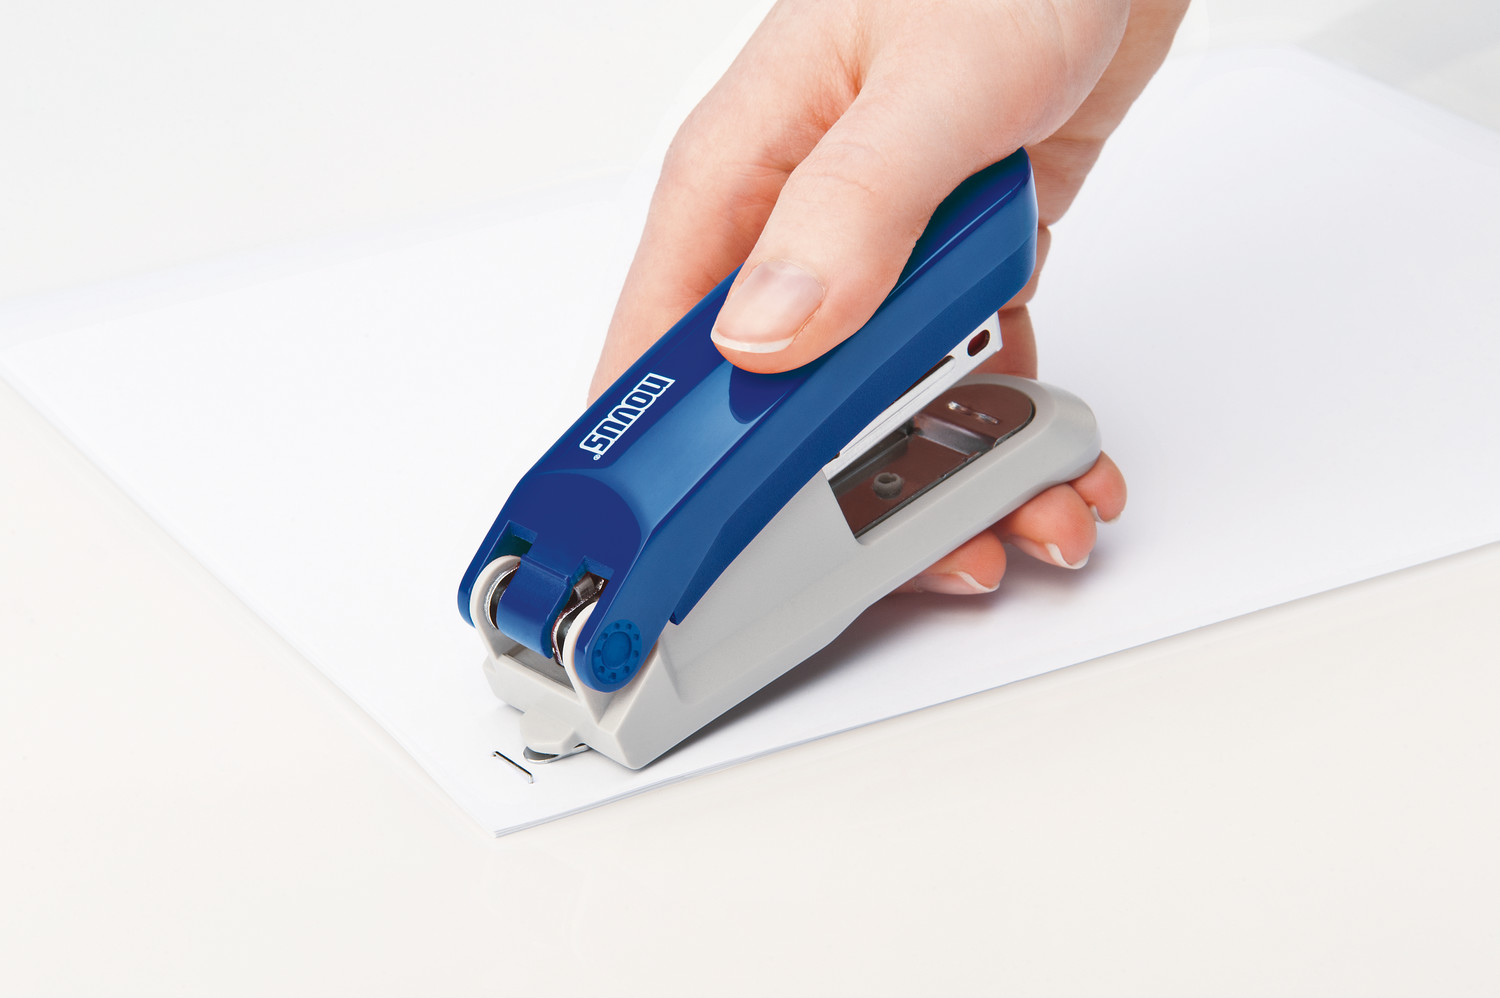 The integrated staple remover takes the effort out of removing staples, making these staplers talented allrounders.